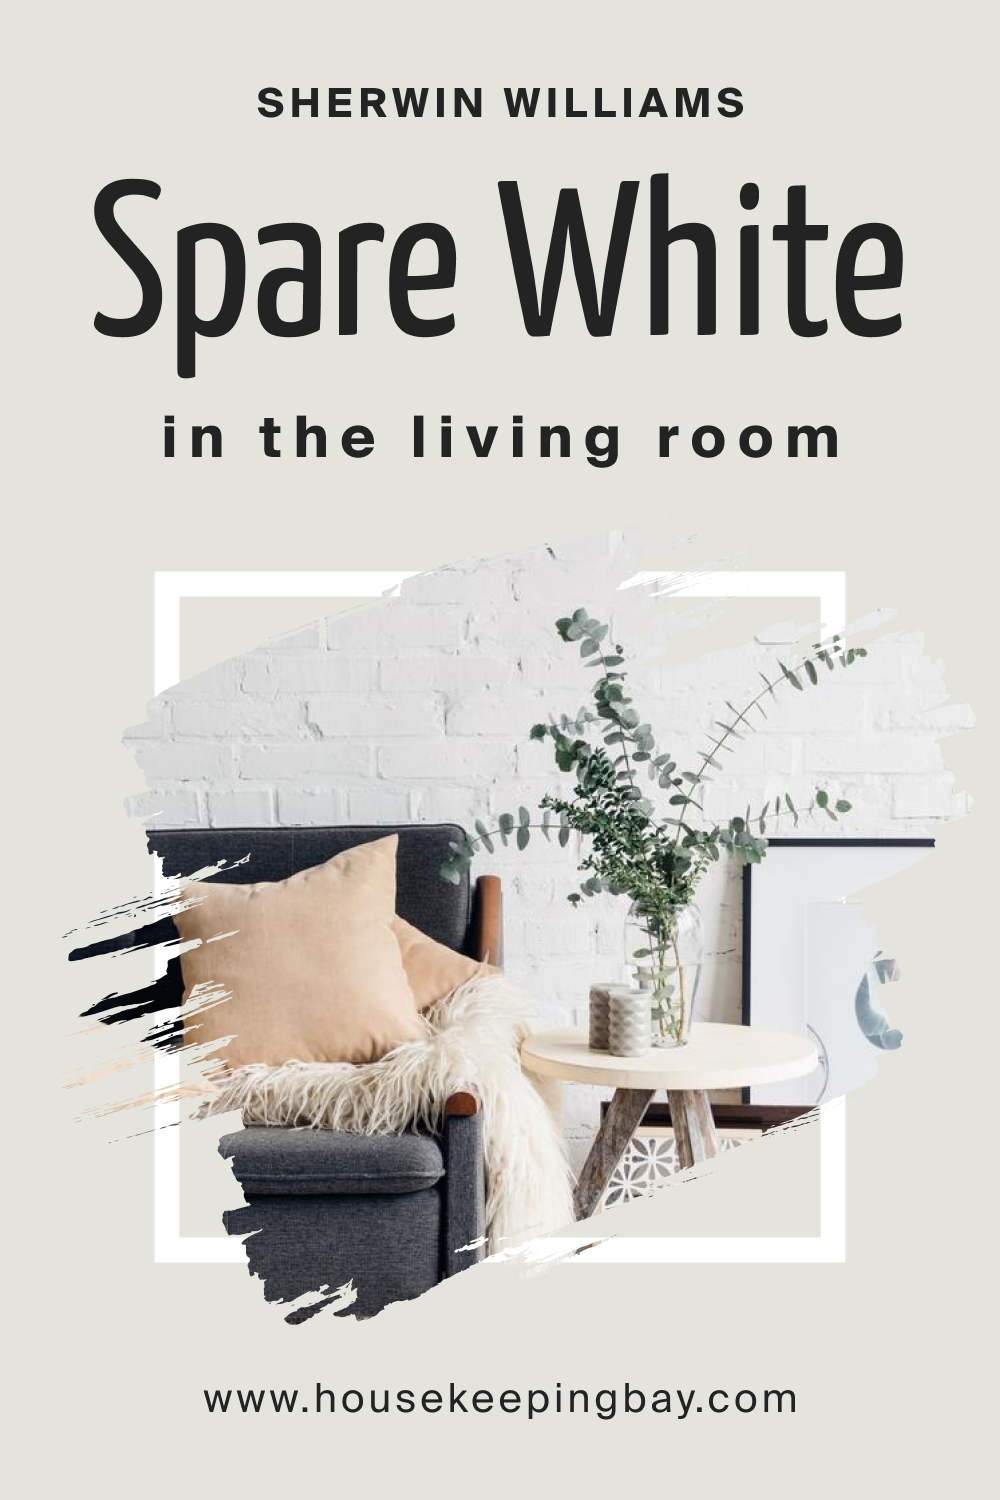 Sherwin Williams. SW Spare White In the Living Room